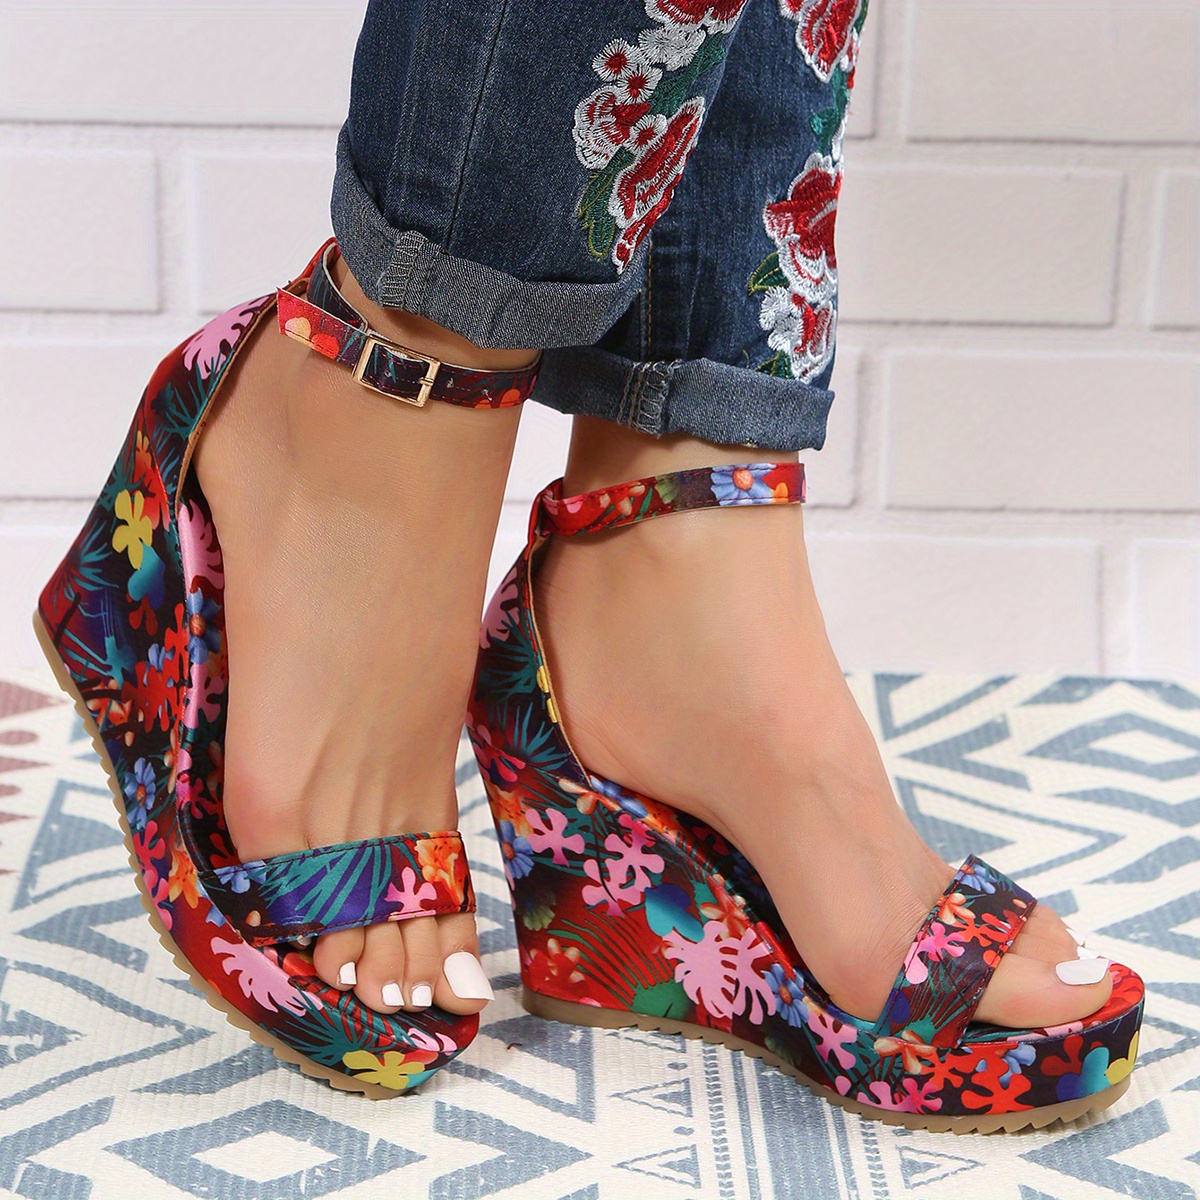  Womens Fashion Wedge Straw High Heels Ankle Strap Bownot  Slingback Sandals Open Toe Flower Platform Summer Shoes